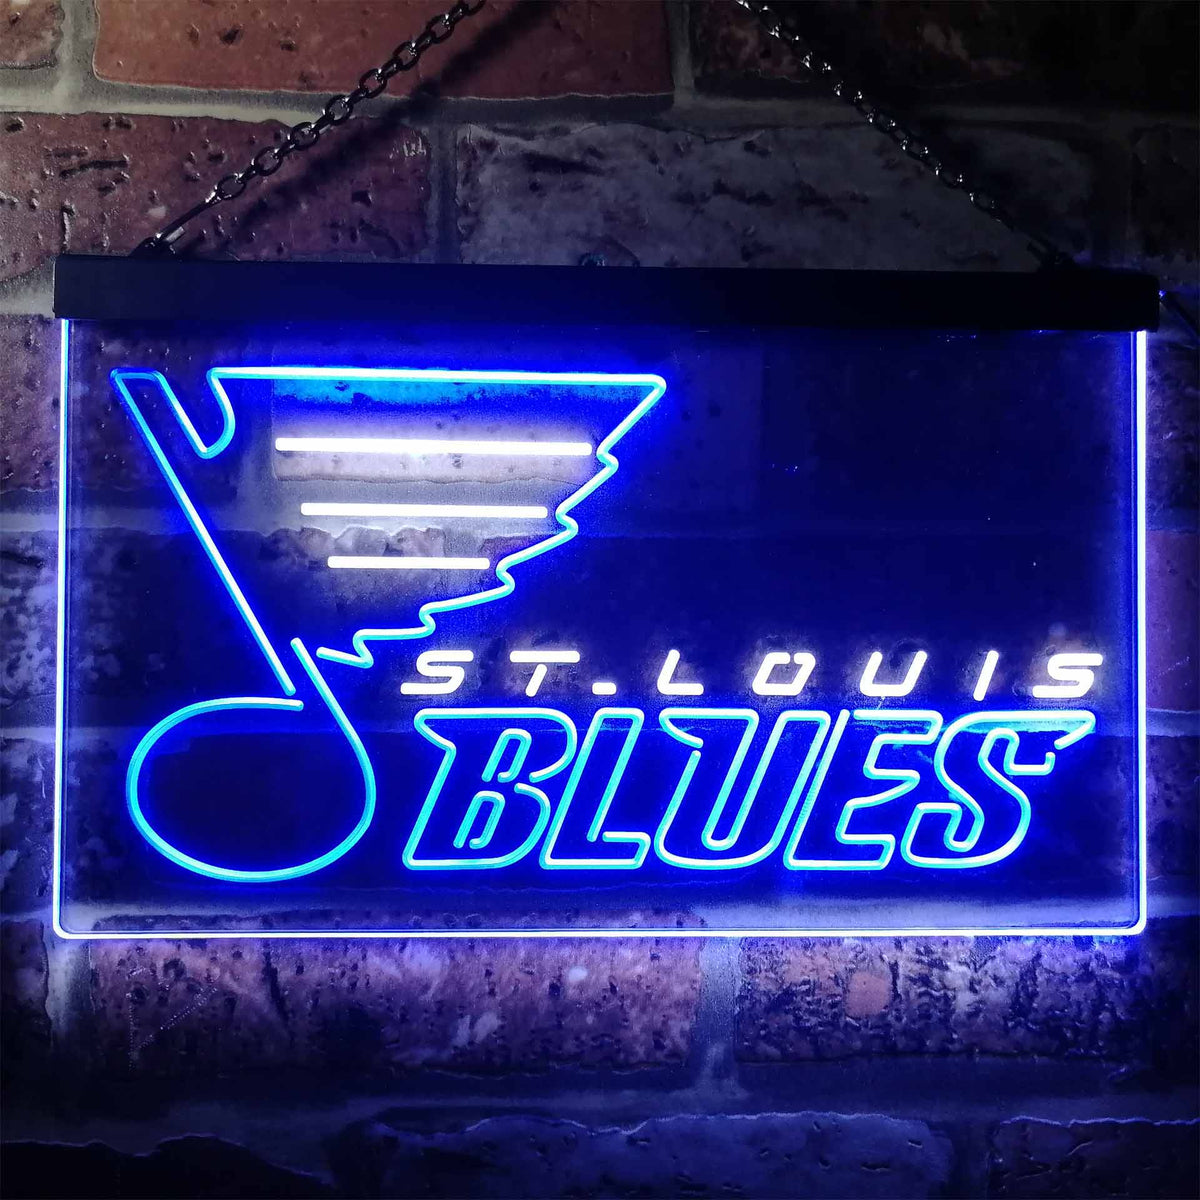 20 St. Louis Blues Light Lamp Neon Sign With HD Vivid Printing Technology